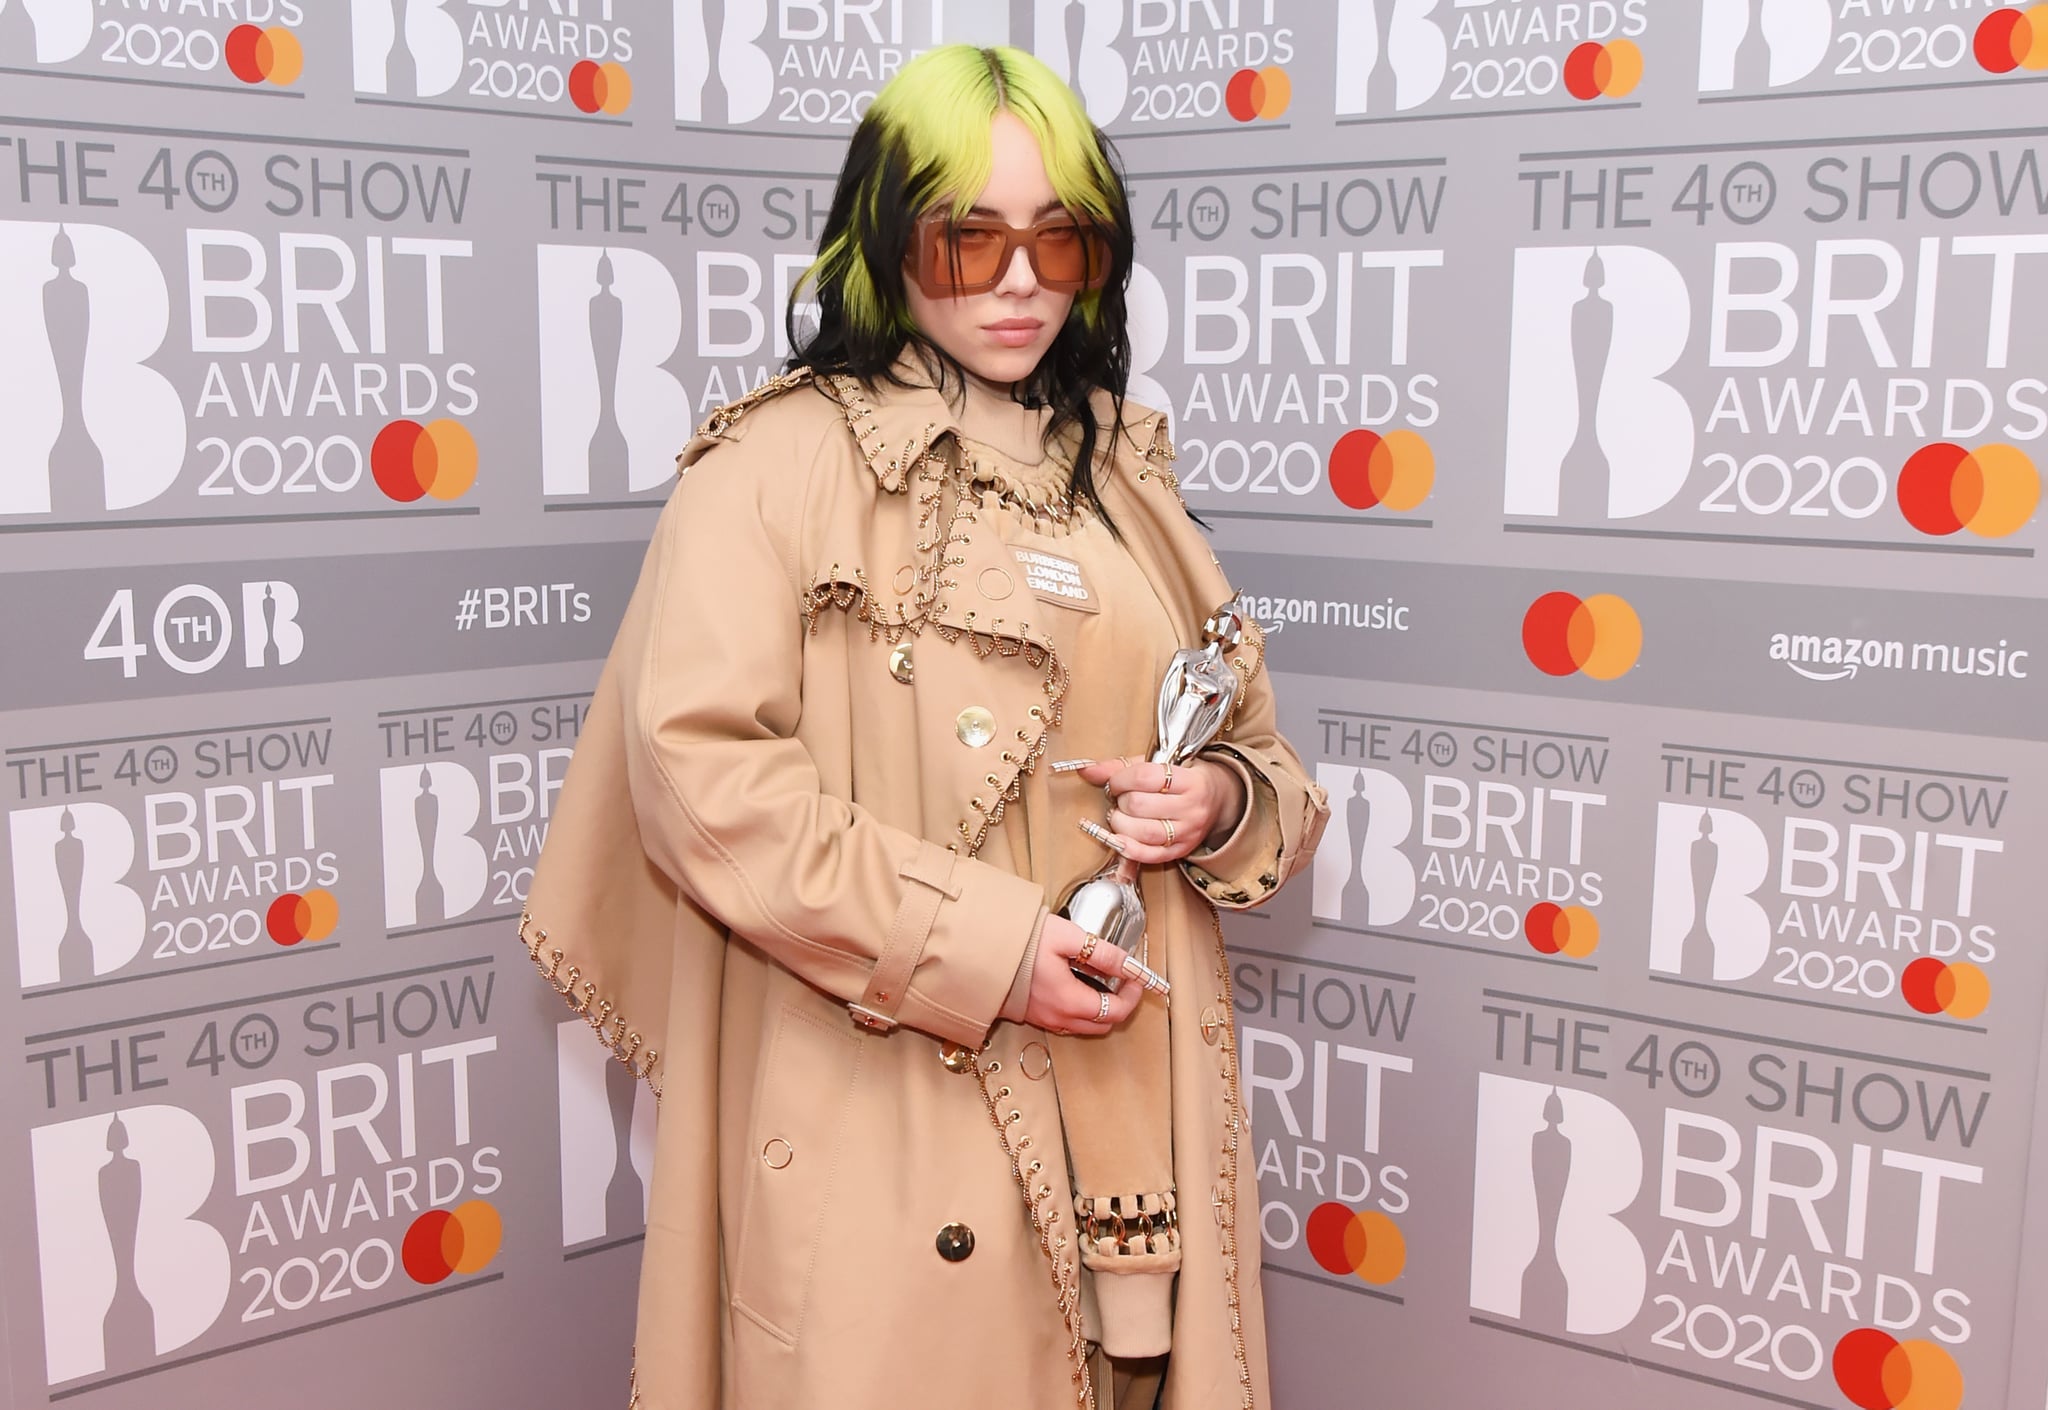 LONDON, ENGLAND - FEBRUARY 18: (EDITORIAL USE ONLY)  Billie Eilish, winner of the Best International Female Solo Artist award, poses in the winners room at The BRIT Awards 2020 at The O2 Arena on February 18, 2020 in London, England.  (Photo by David M. Benett/Dave Benett/Getty Images)